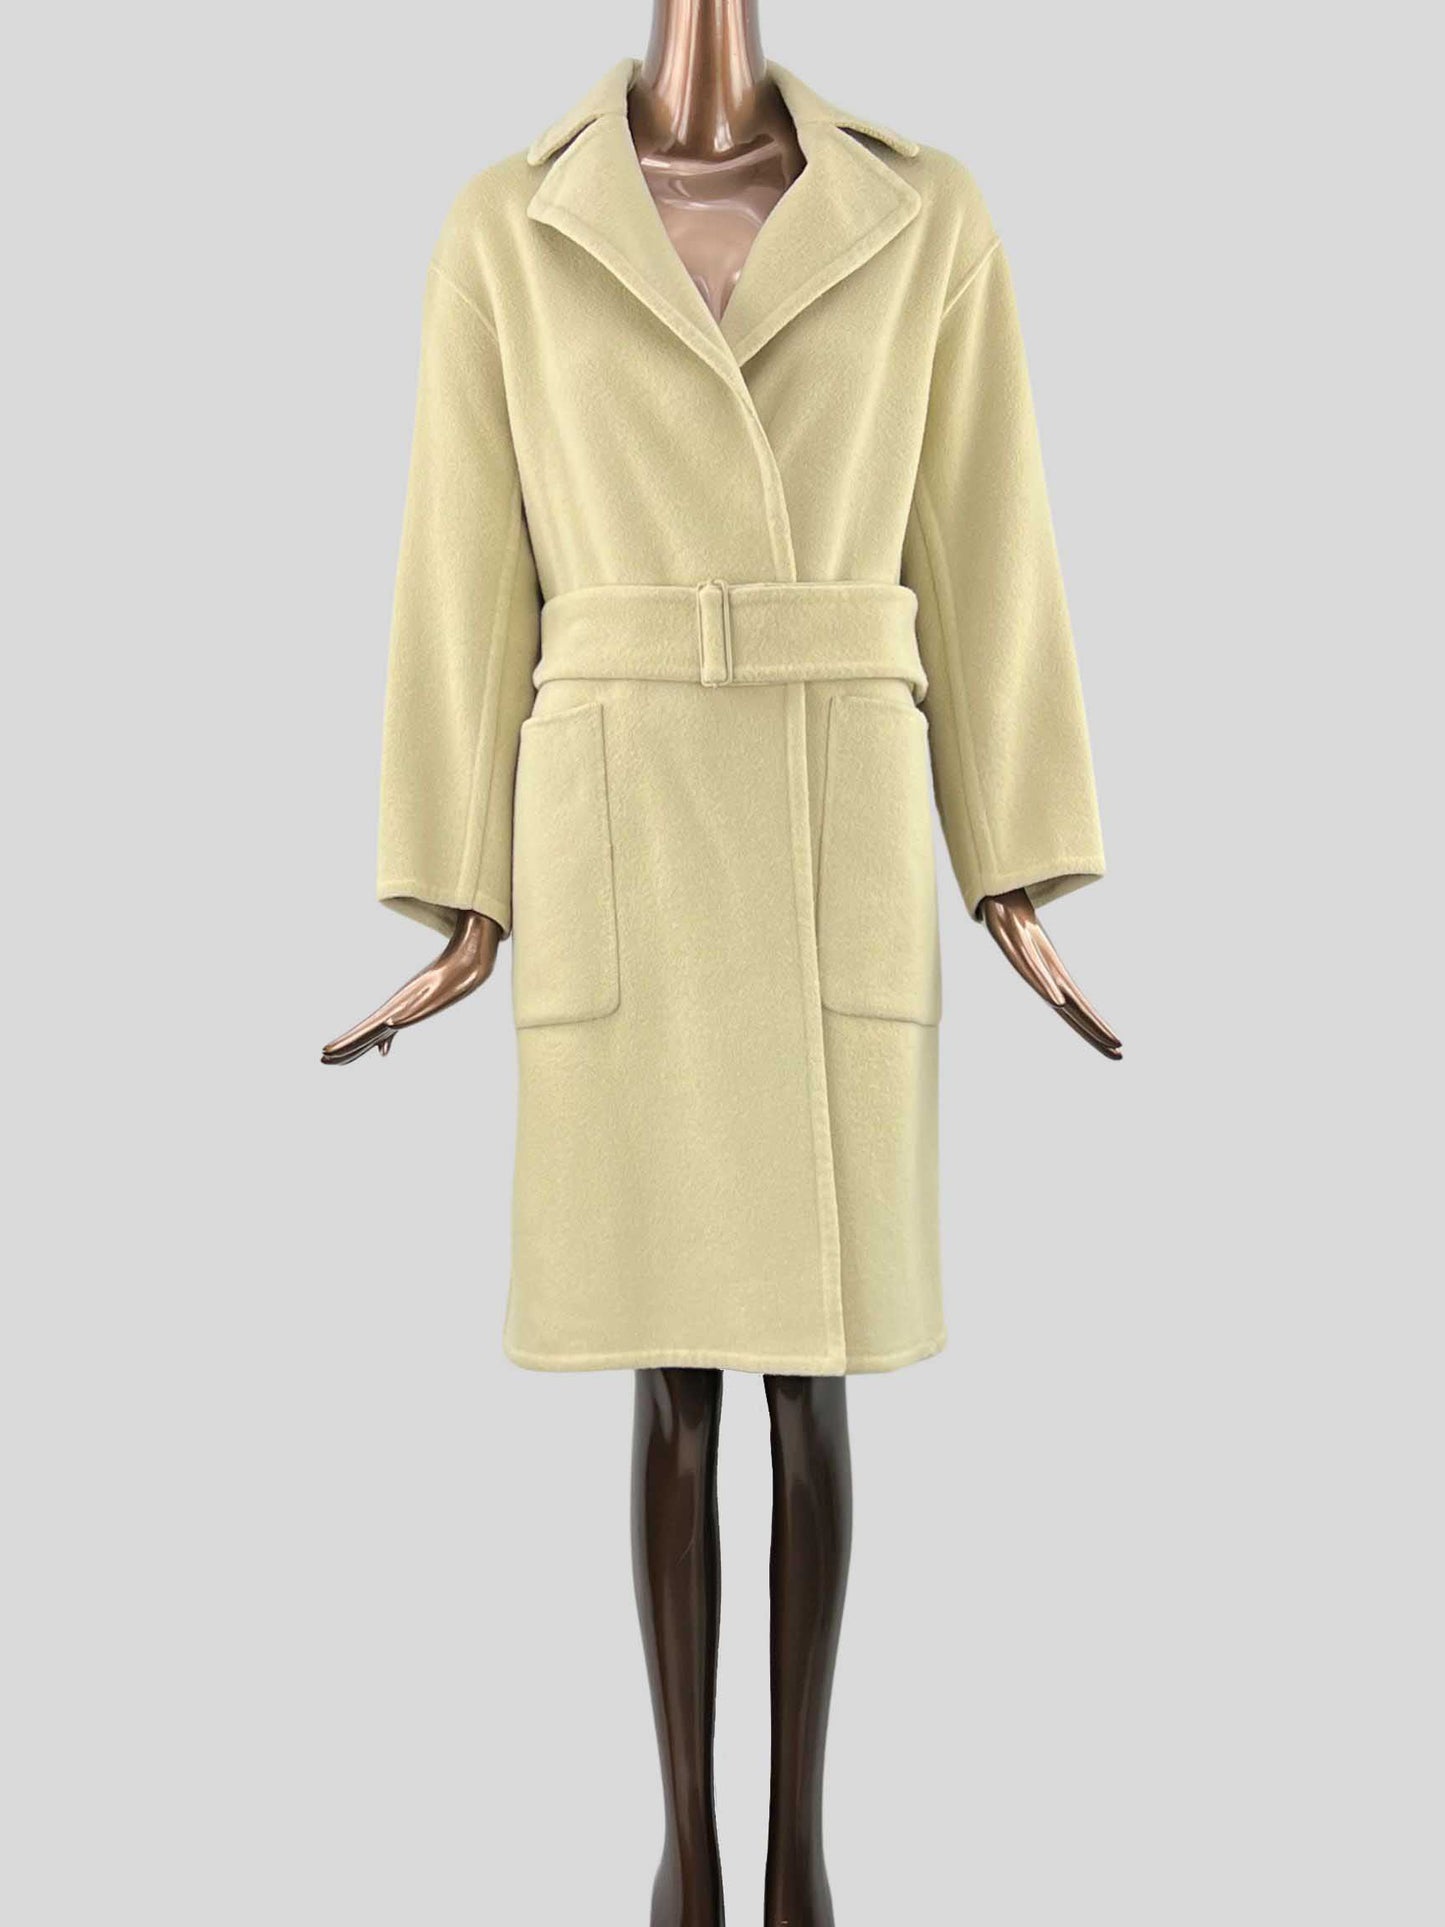 VINCE single-button front belted coat with lapel collar